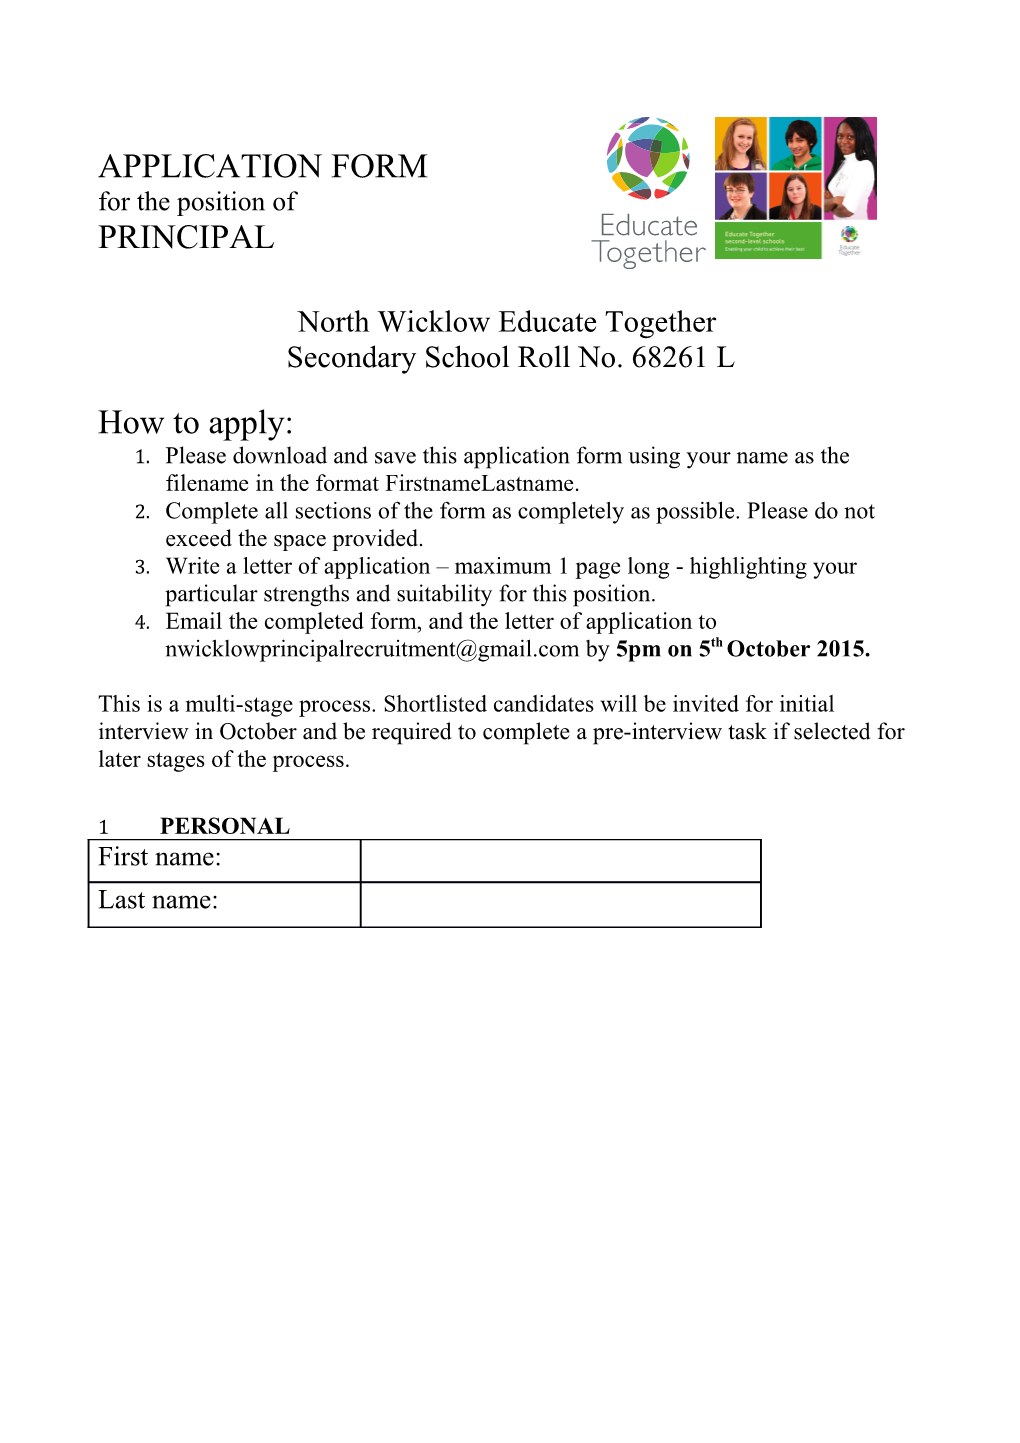 North Wicklow Educate Together